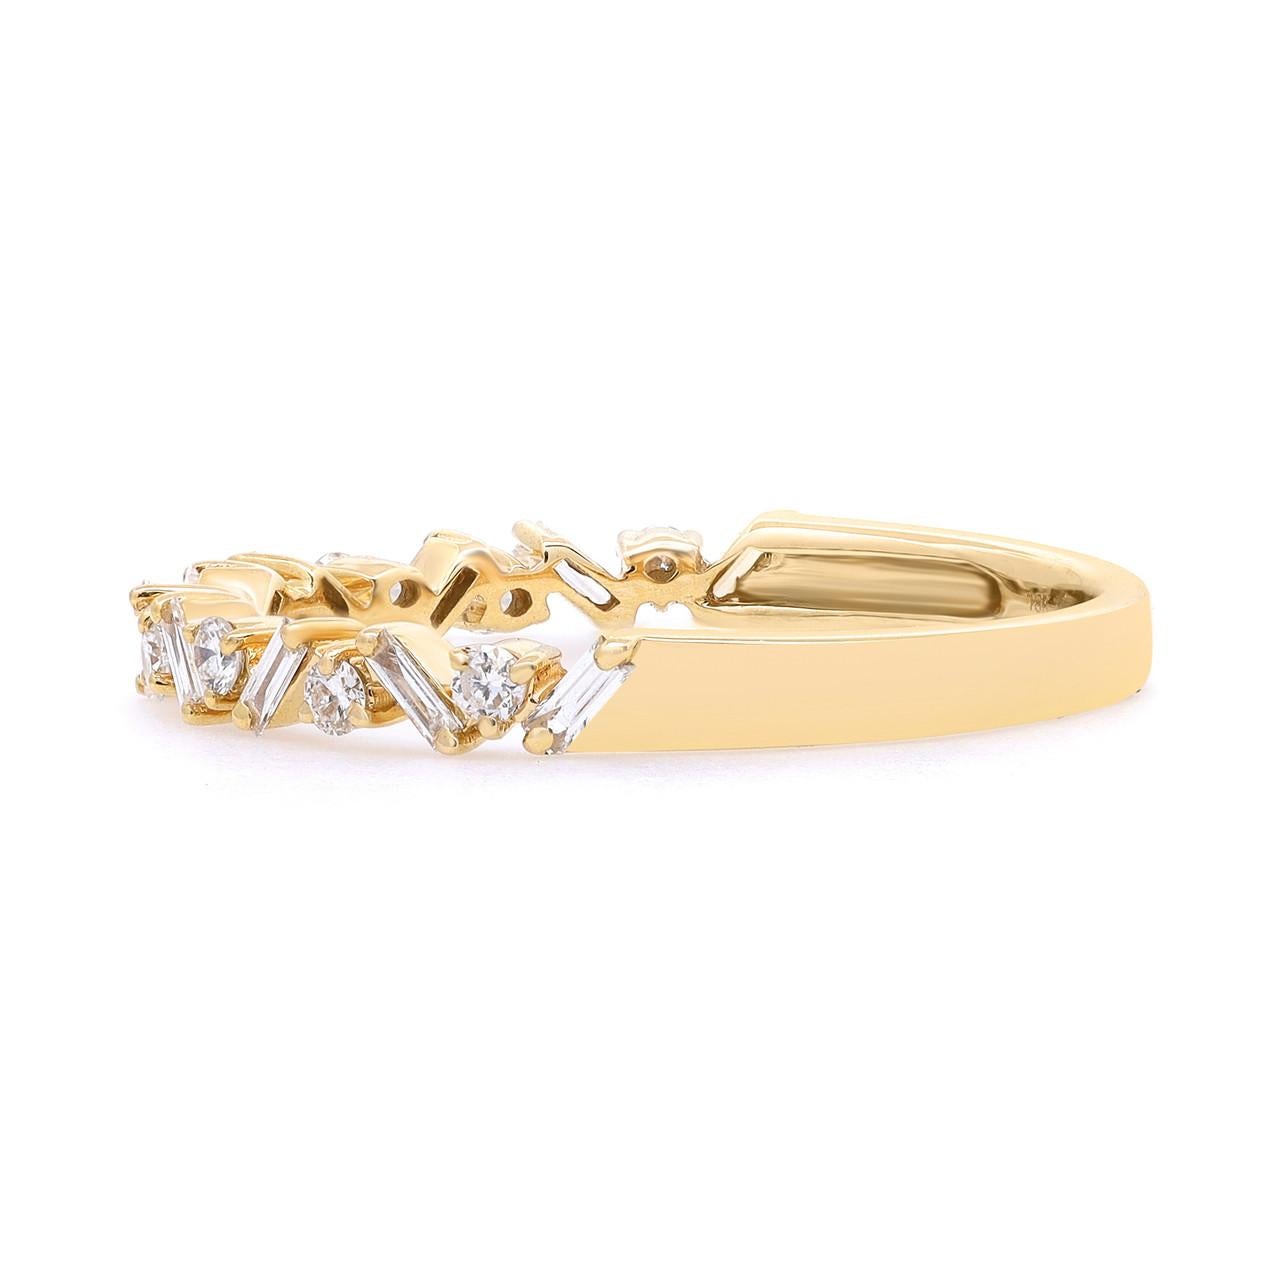 Introducing our exquisite 0.30 Carat Baguette & Round Cut Diamond Ring in 18K Yellow Gold. This mesmerizing piece features a stunning variety of diamond shapes, including princess round and baguette cuts, beautifully arranged in a dot dash pattern.